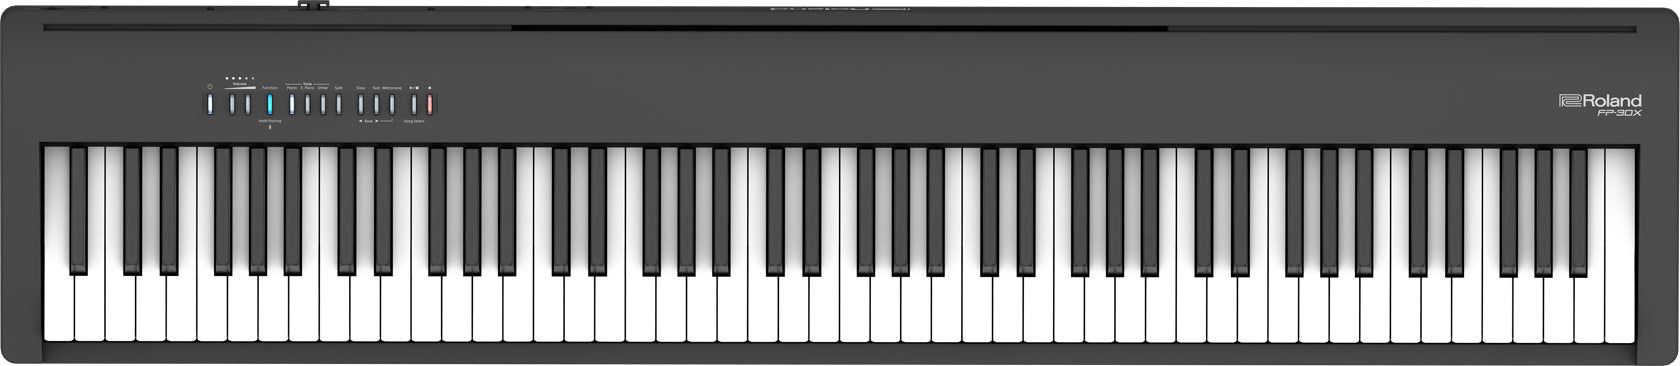 ROLAND FP-30X DIGITAL PIANO (W/BLUETOOTH) BLACK COME WITH RH5 HEADPHONE, DAMPER PEDAL & NOTE STAND (No Wood Stand version/ FP30X/ FP 30X), ROLAND, DIGITAL PIANO, roland-digital-piano-fp30xbk, ZOSO MUSIC SDN BHD